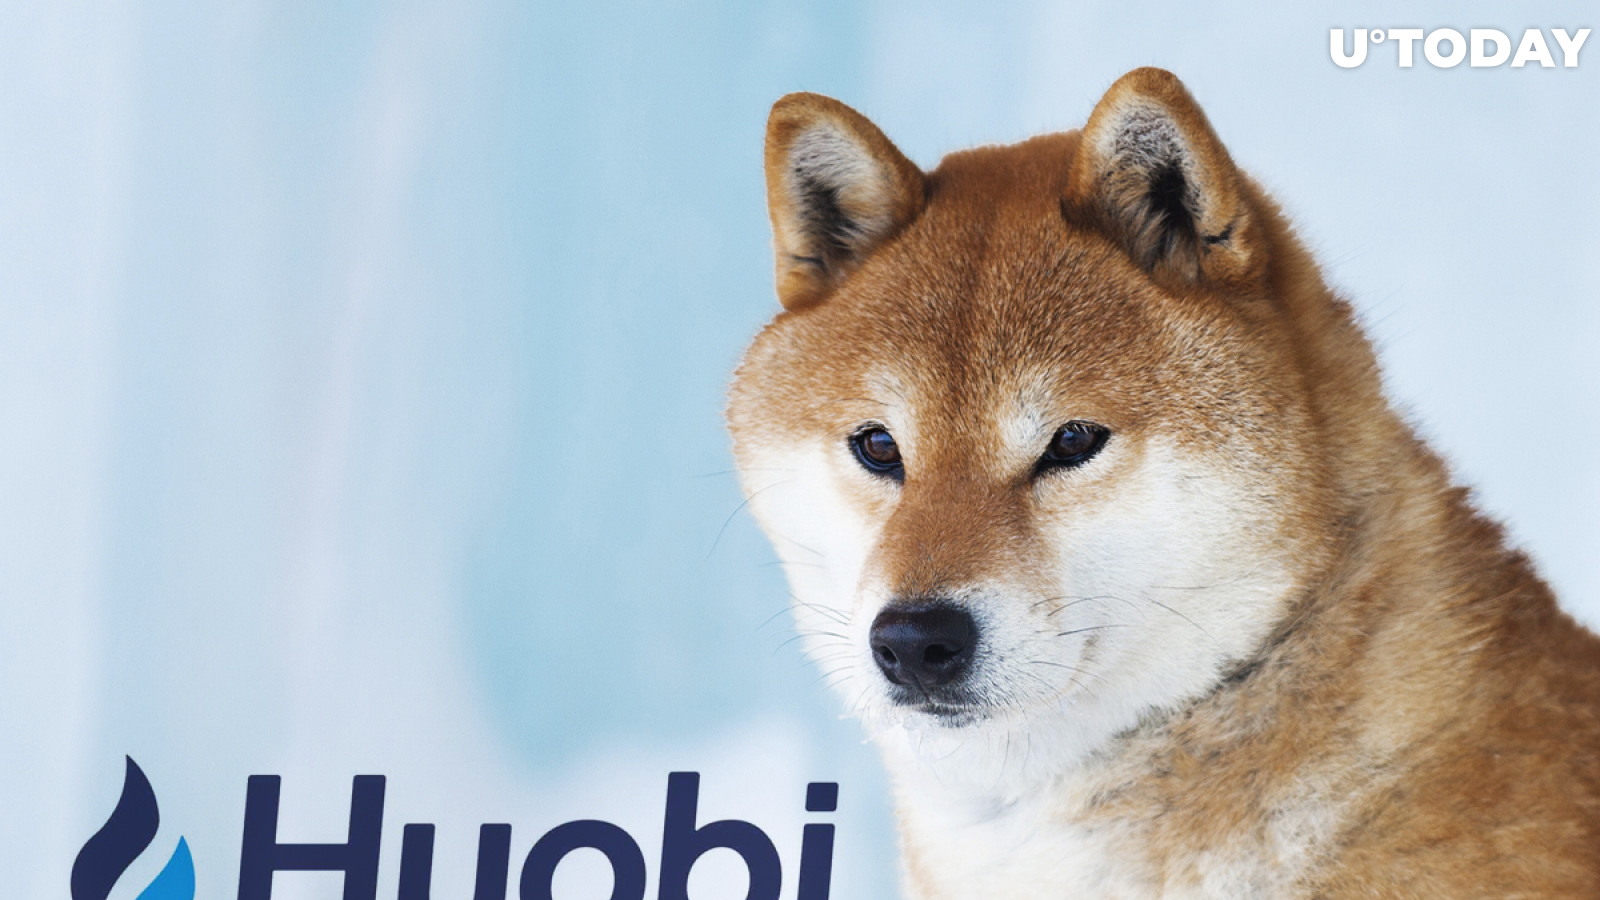 SHIB, DOGE Now Available on Huobi Earn. See the APY